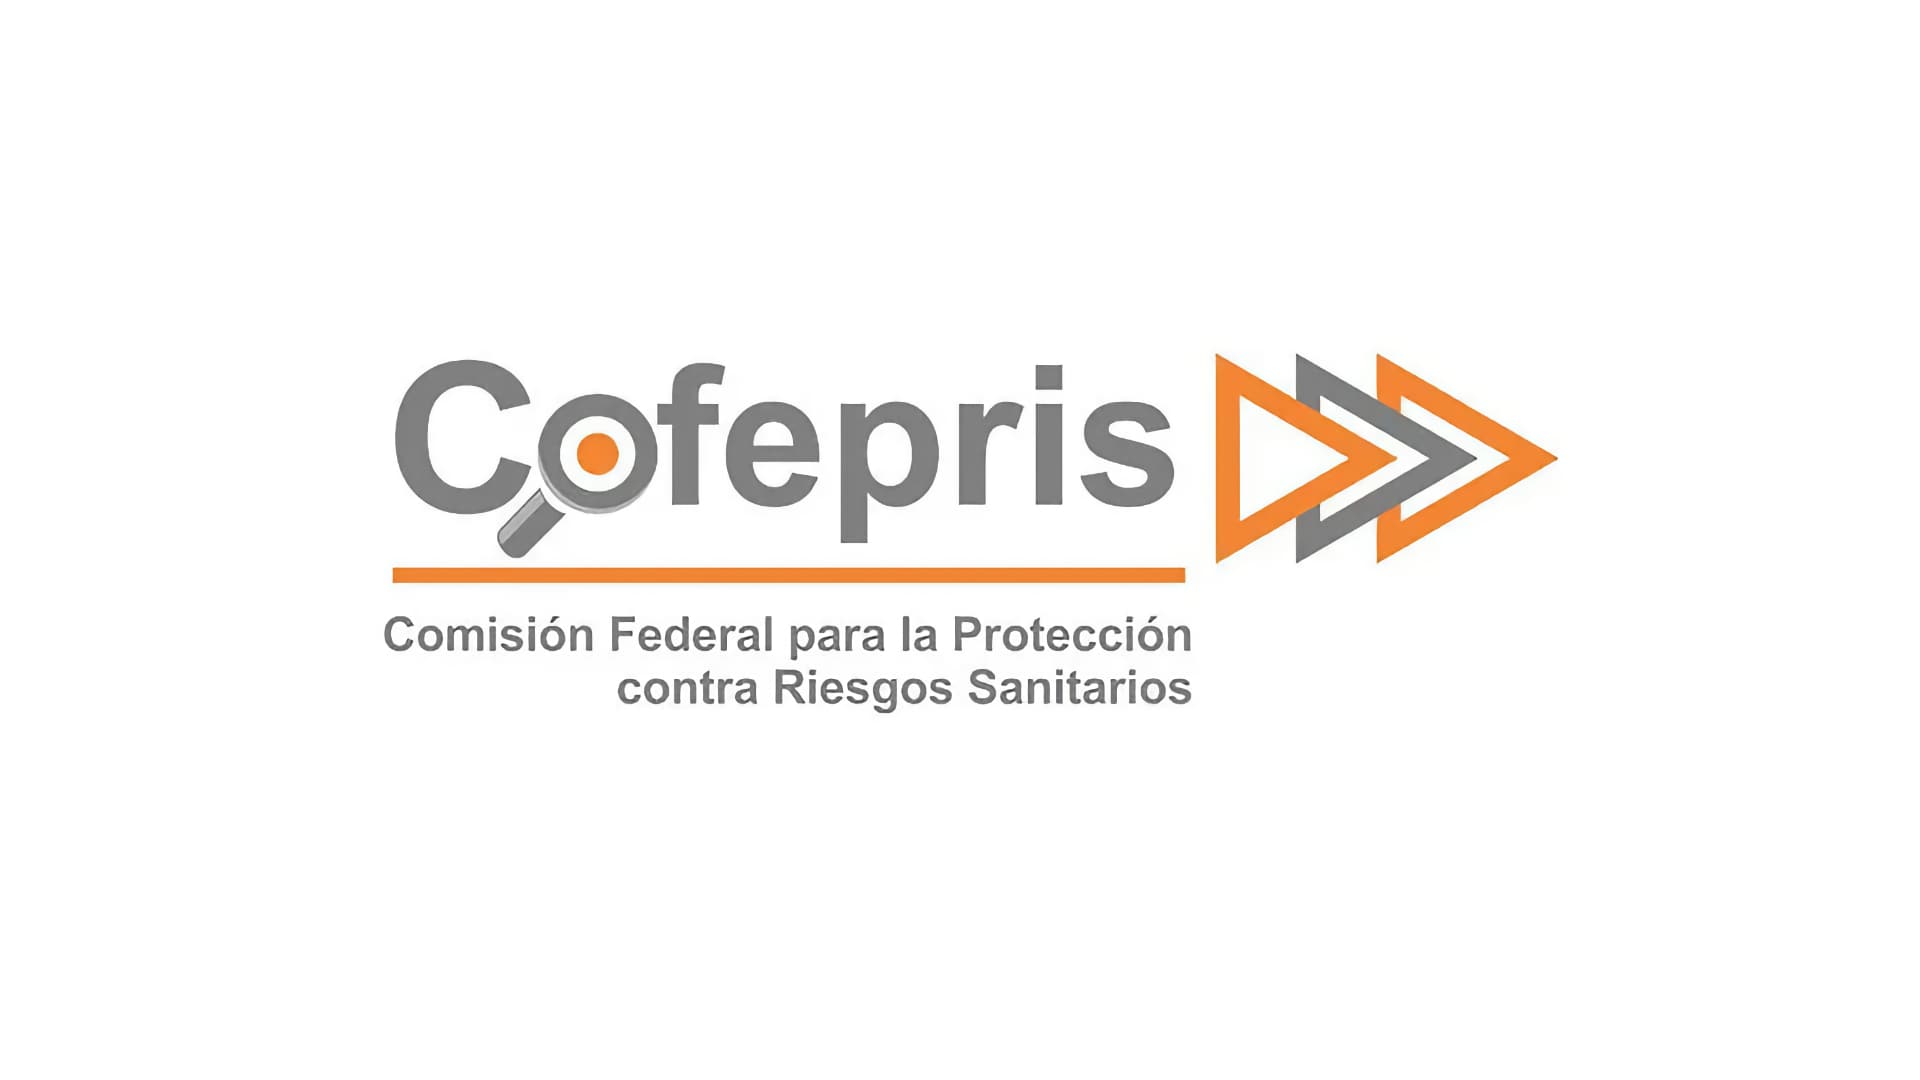 COFEPRIS attends 219 technical sessions for the pharmaceutical sector